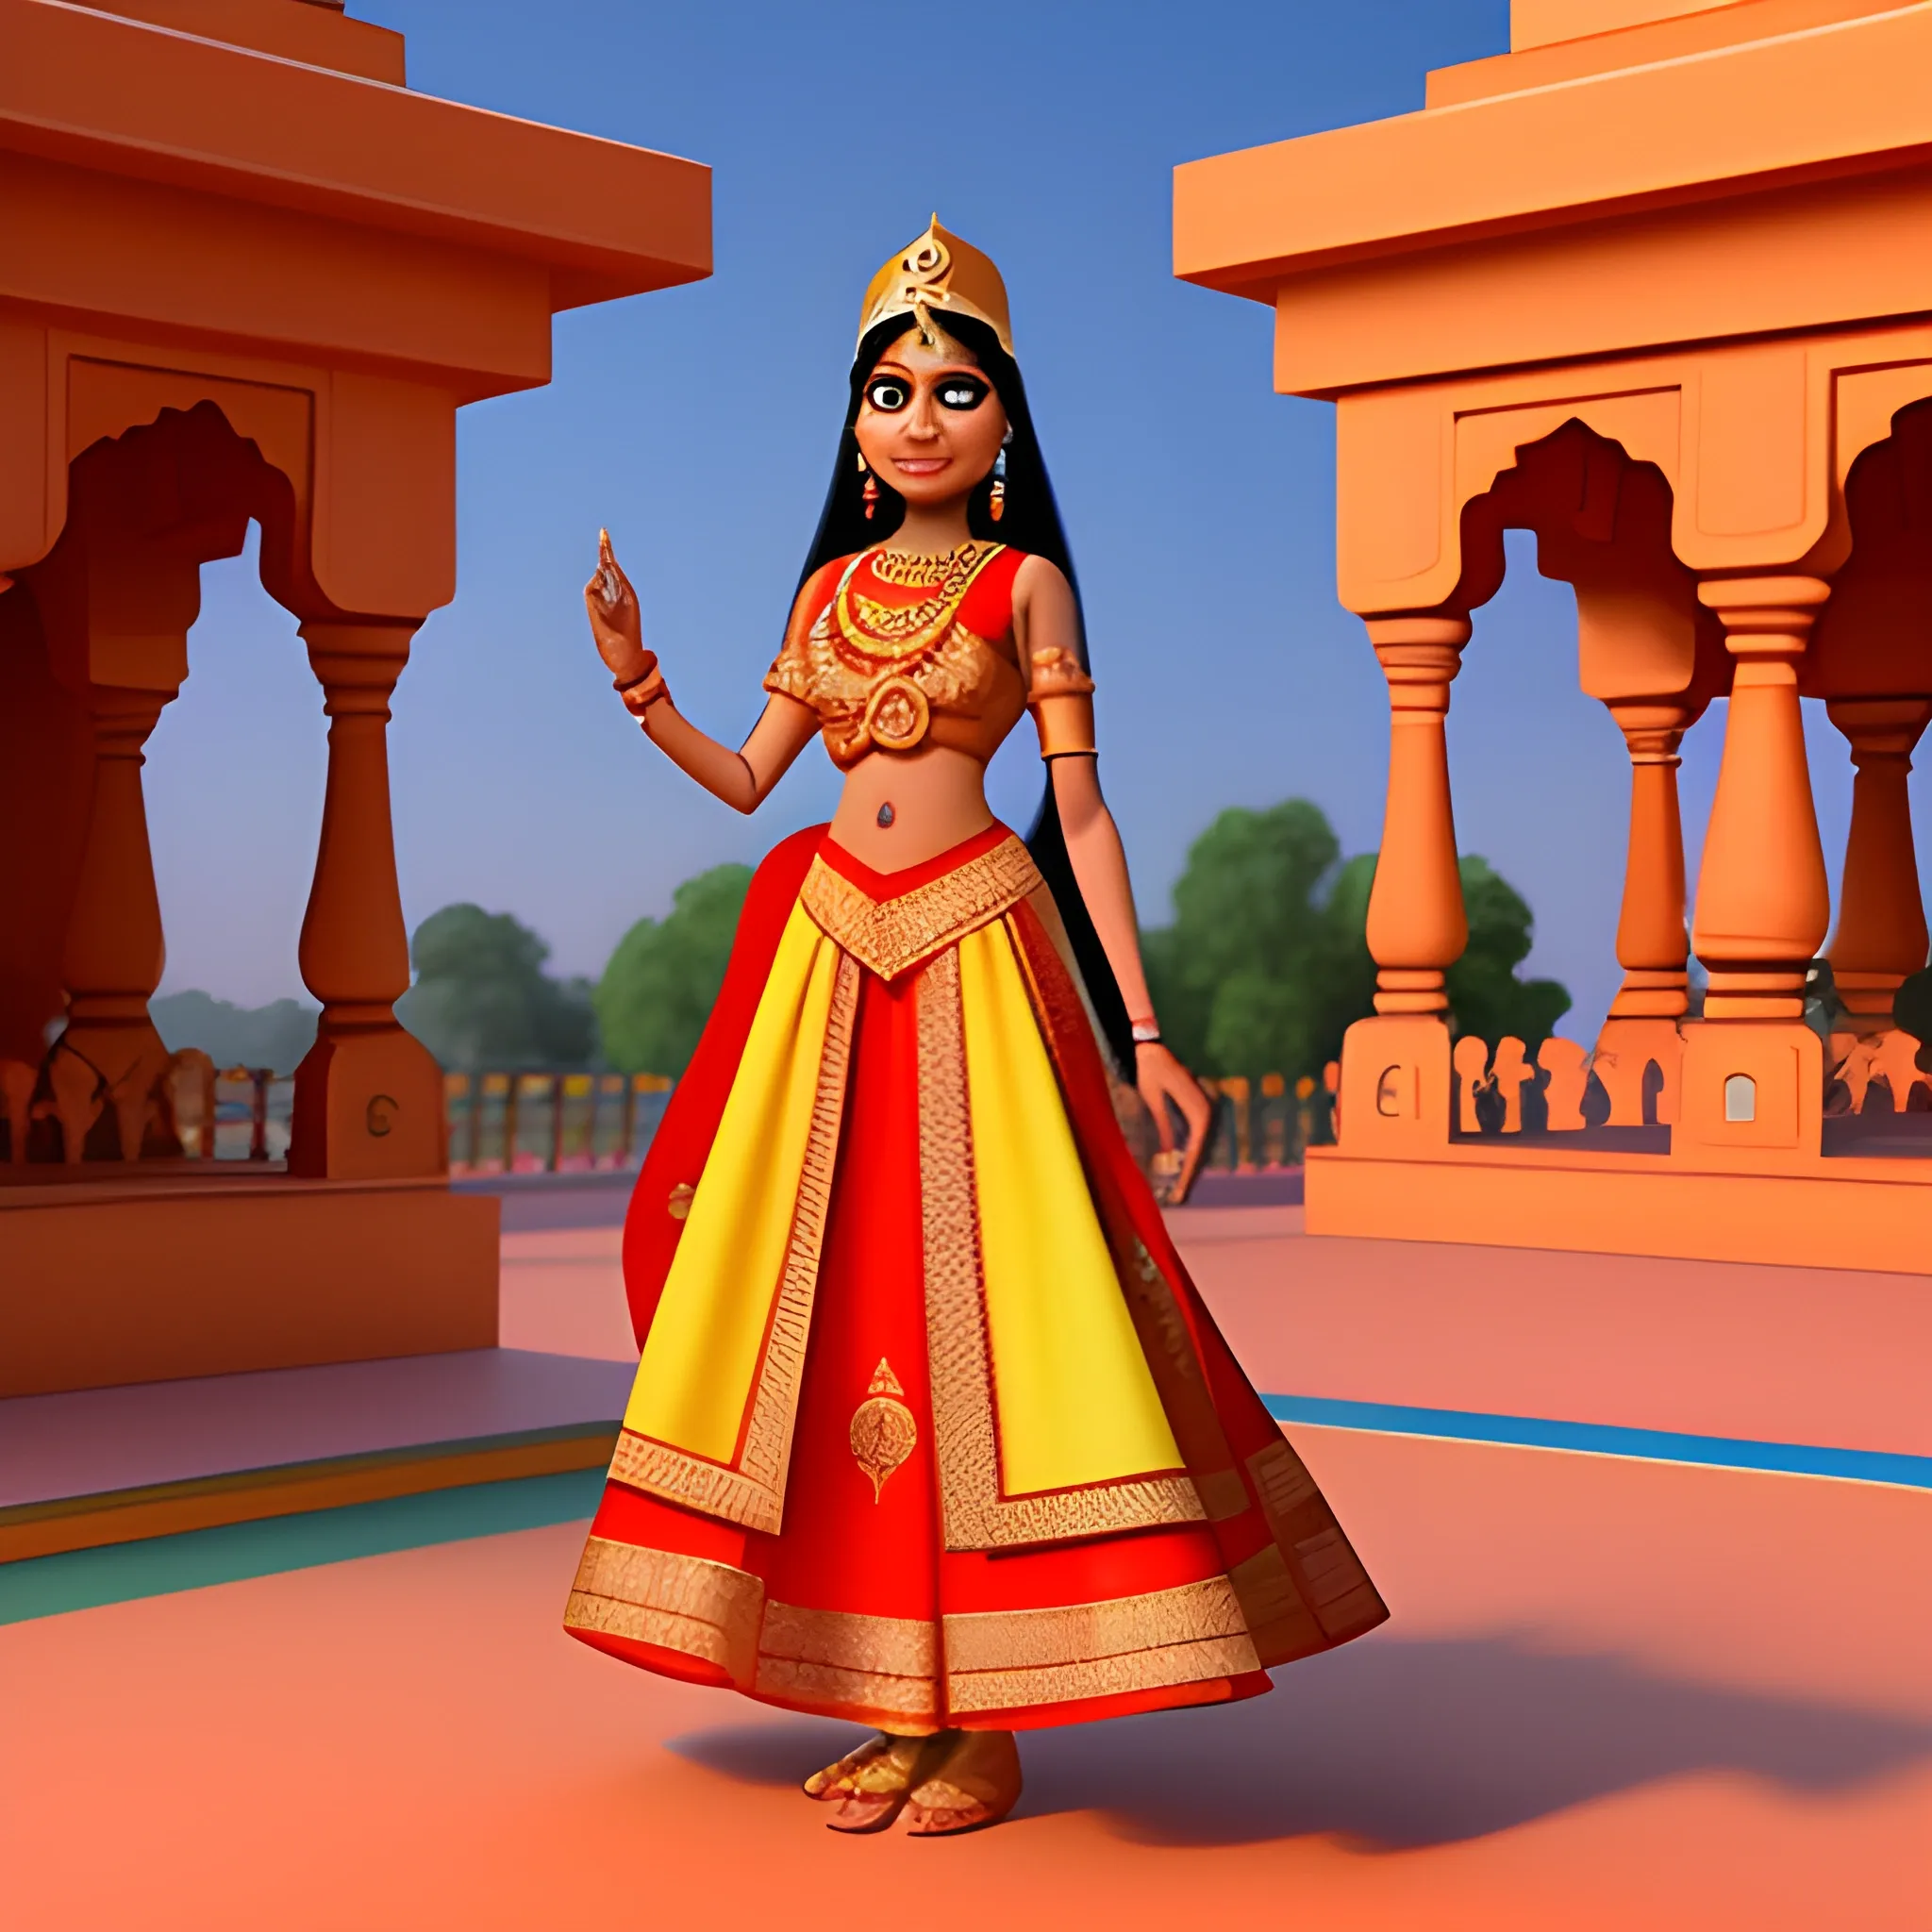 Pixar-style Indian princess in traditional clothing in India, 3D